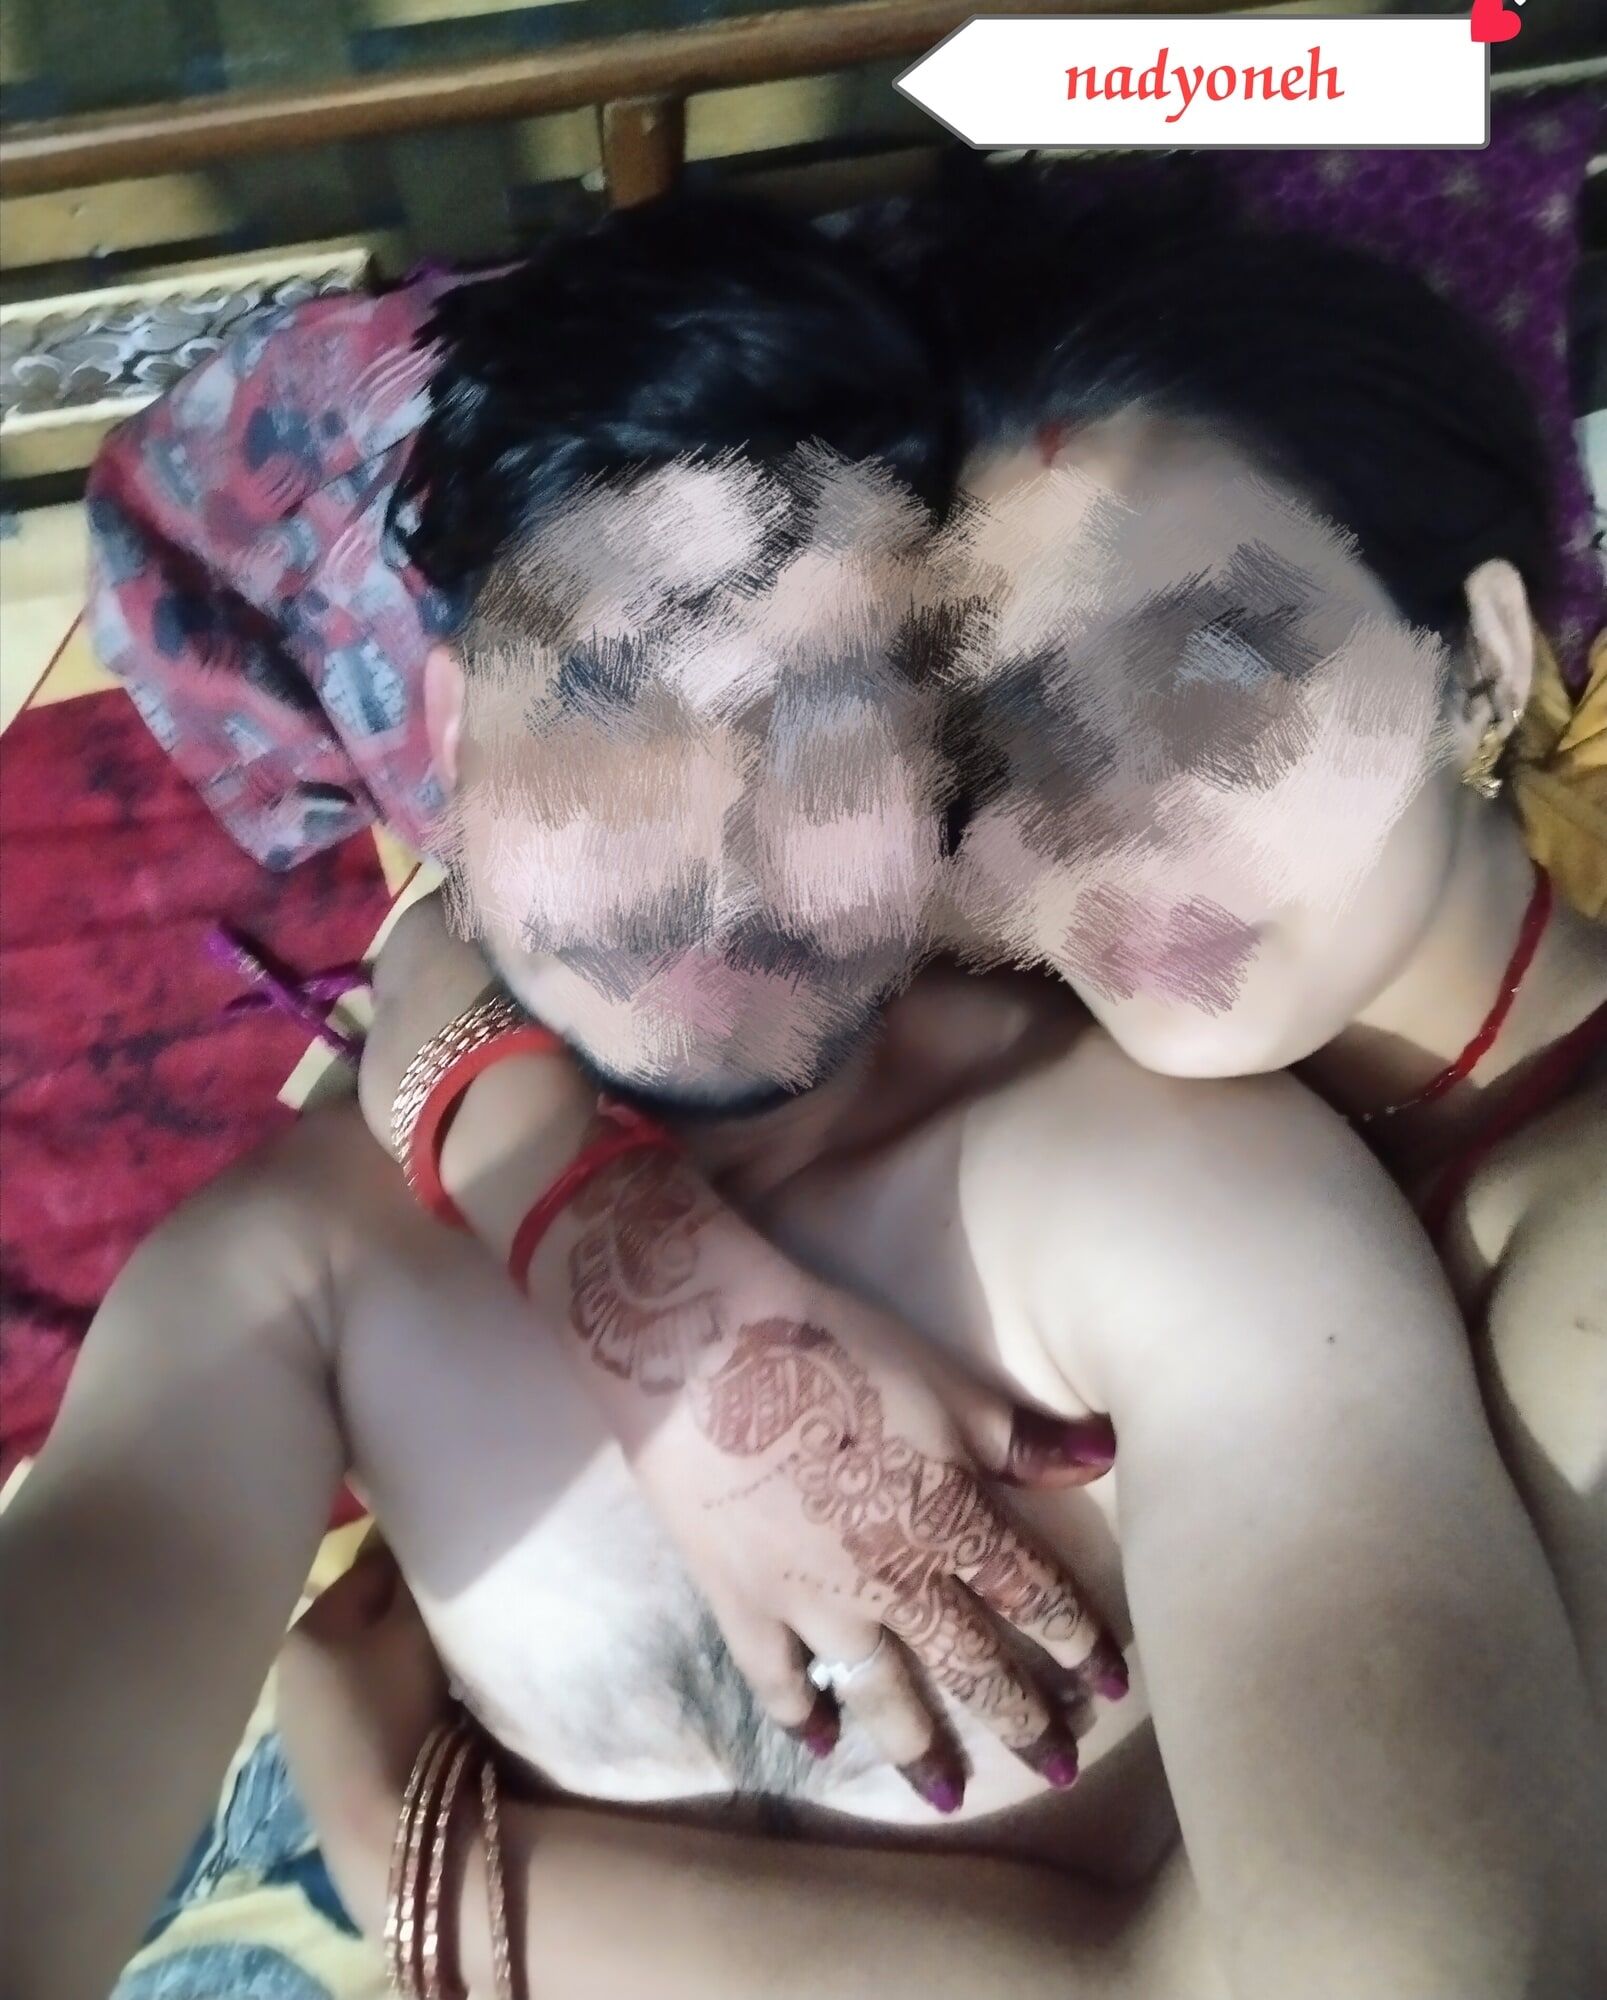 Me and my horny wife jiya .have some fun time photos  #9